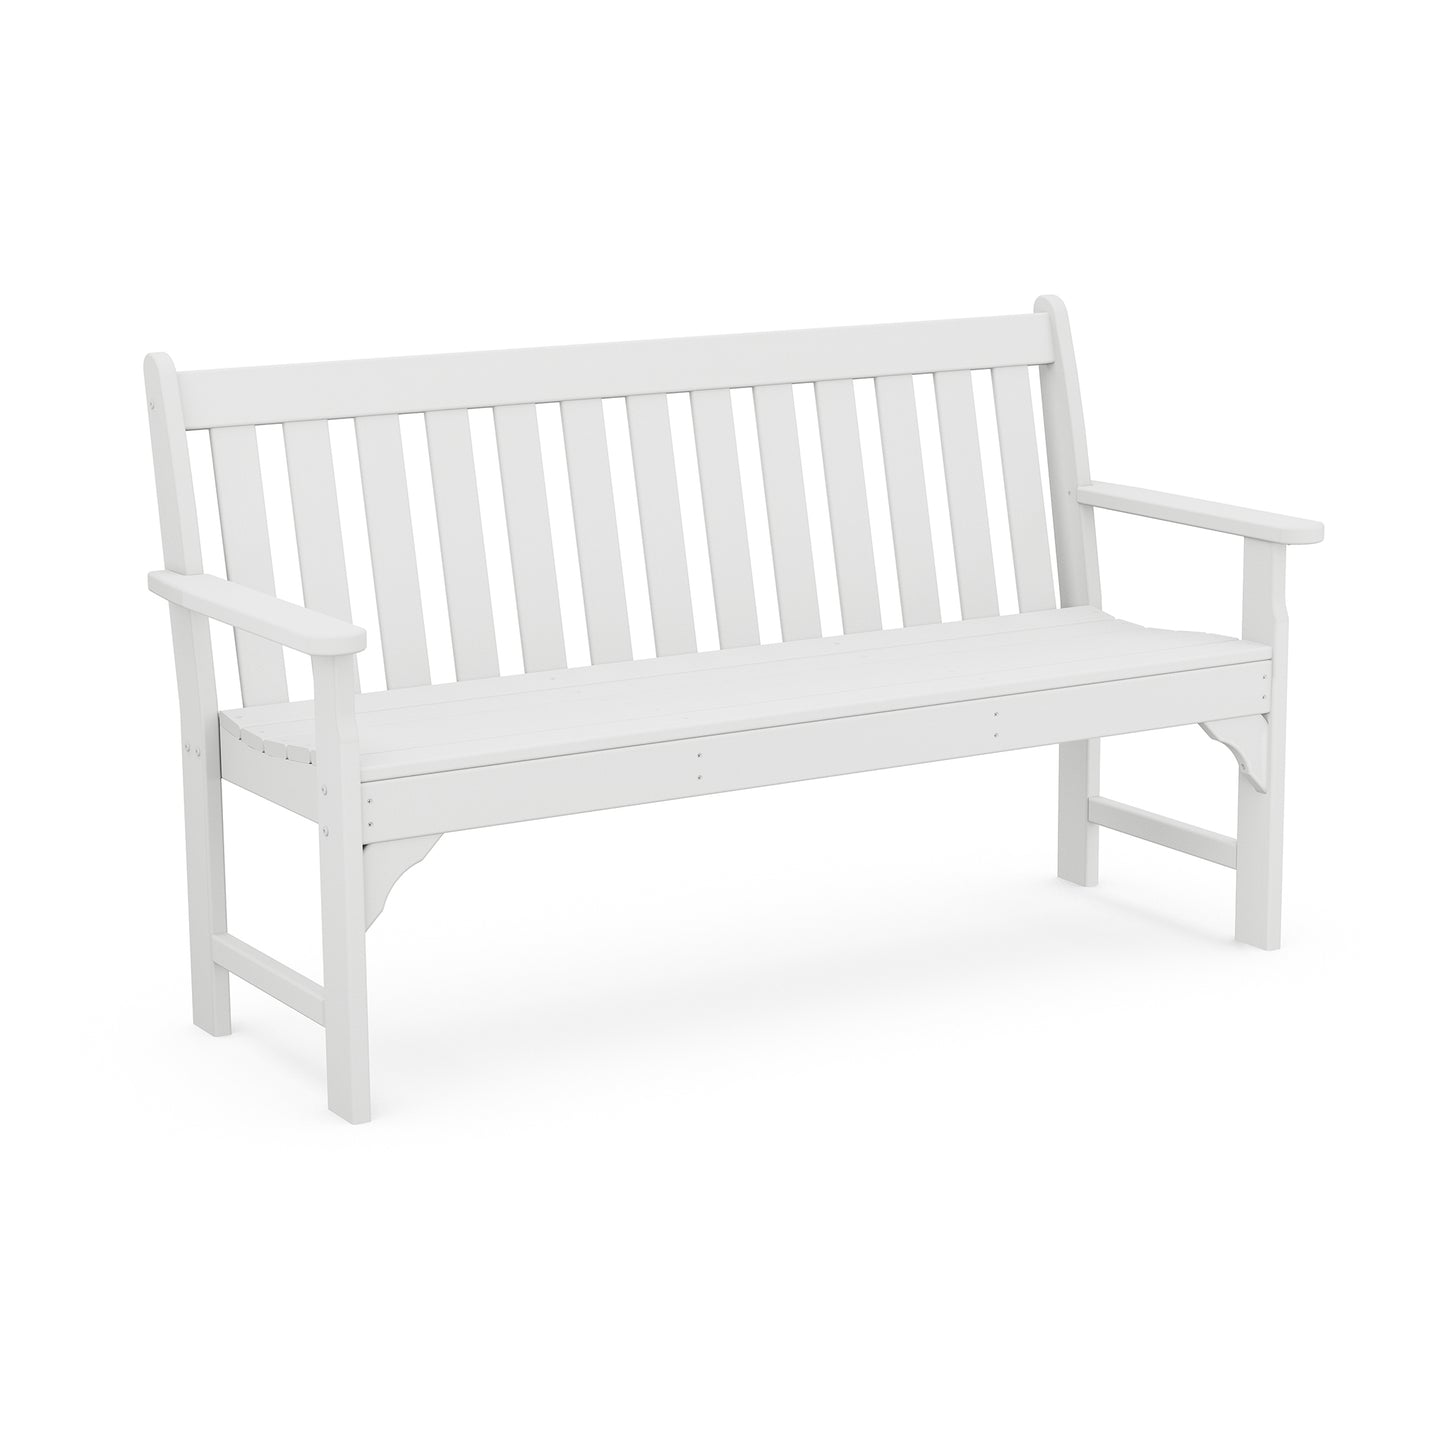 A white POLYWOOD Vineyard 60" garden bench with a high backrest and armrests, isolated on a plain white background.